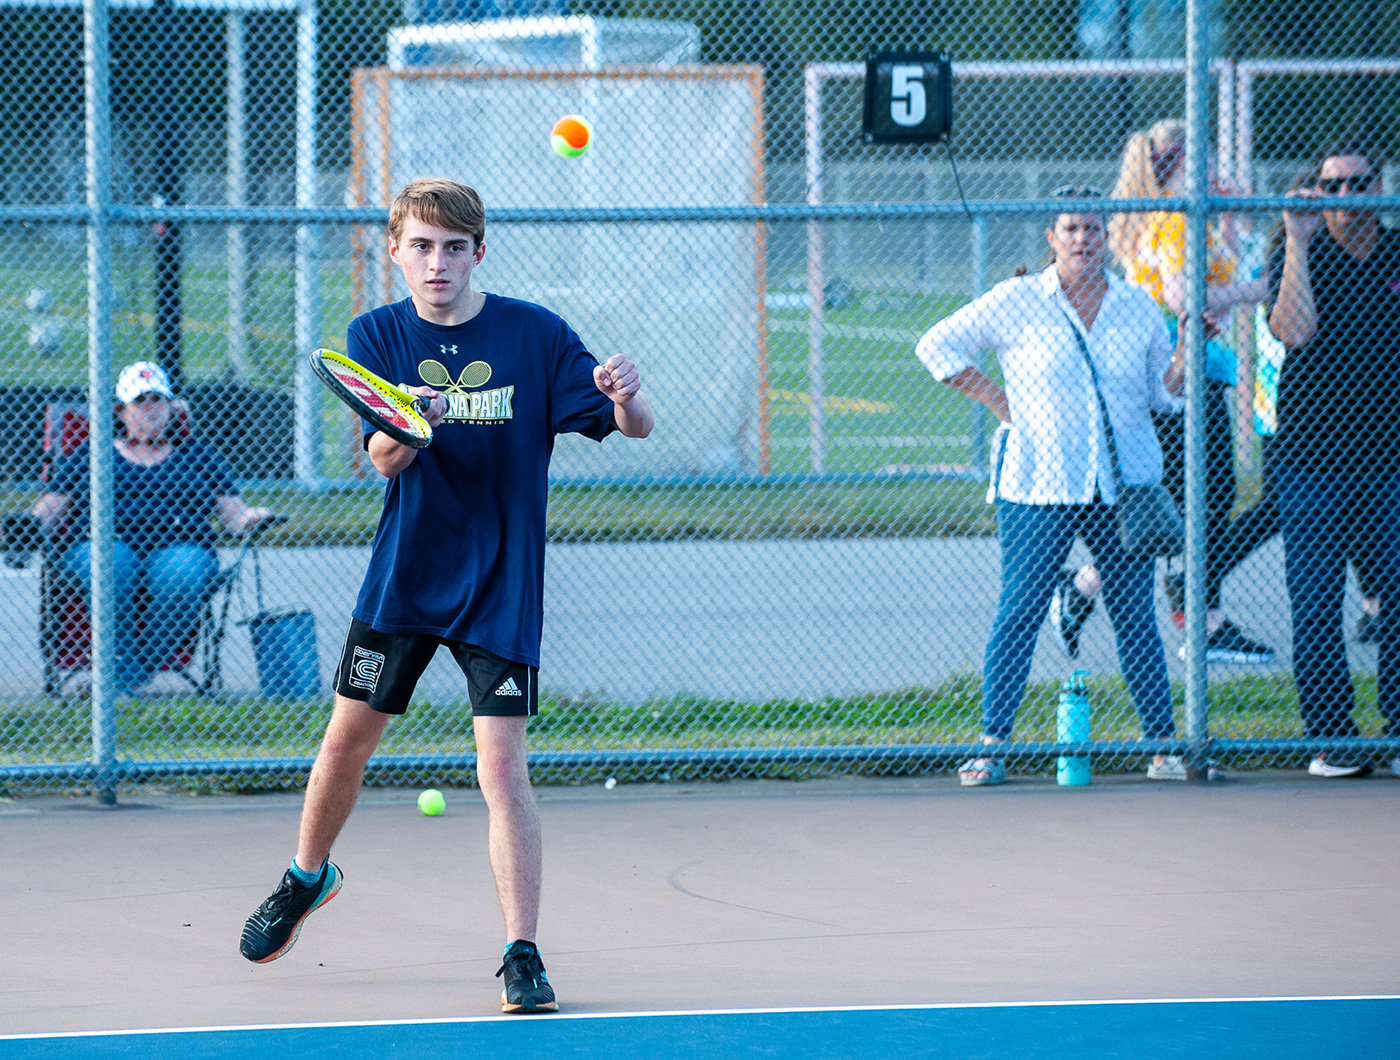 William Stimpson enjoys the challenge of playing tennis teams at other schools. During a fall match, he served the ball to a Northeast opponent.